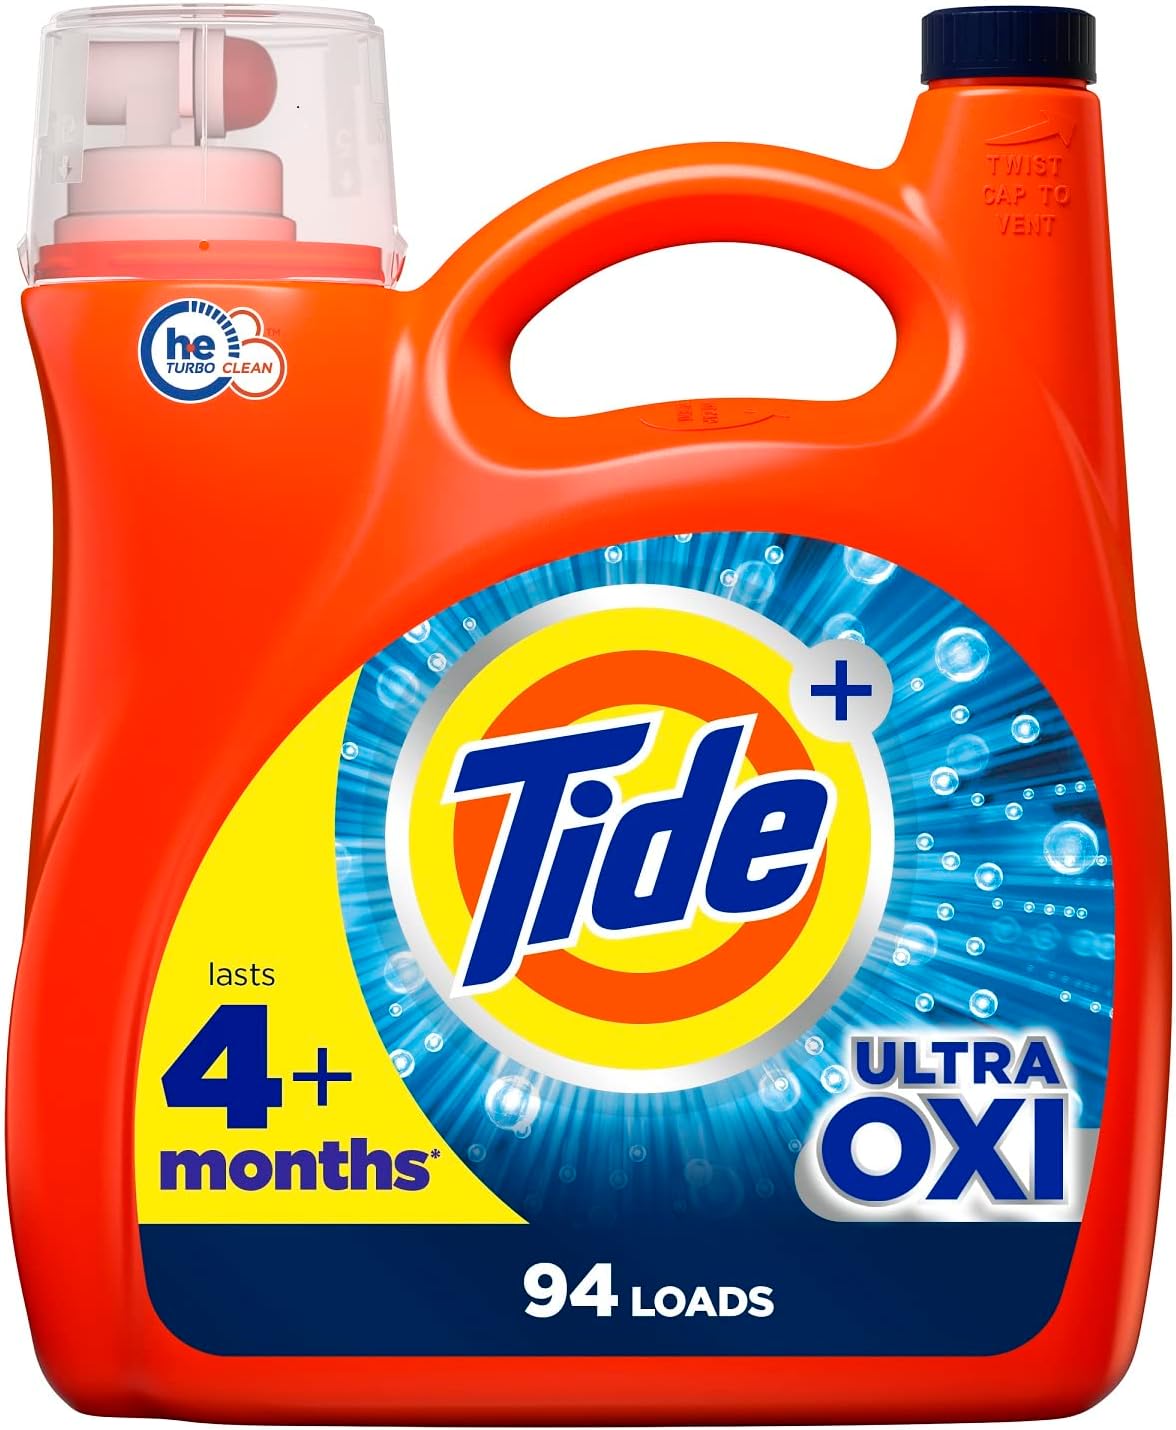 132-Oz Tide Ultra Oxi Liquid Laundry Detergent + $14 Amazon Credit $18.95 w/ S&S + Free Shipping w/ Prime or on $35+